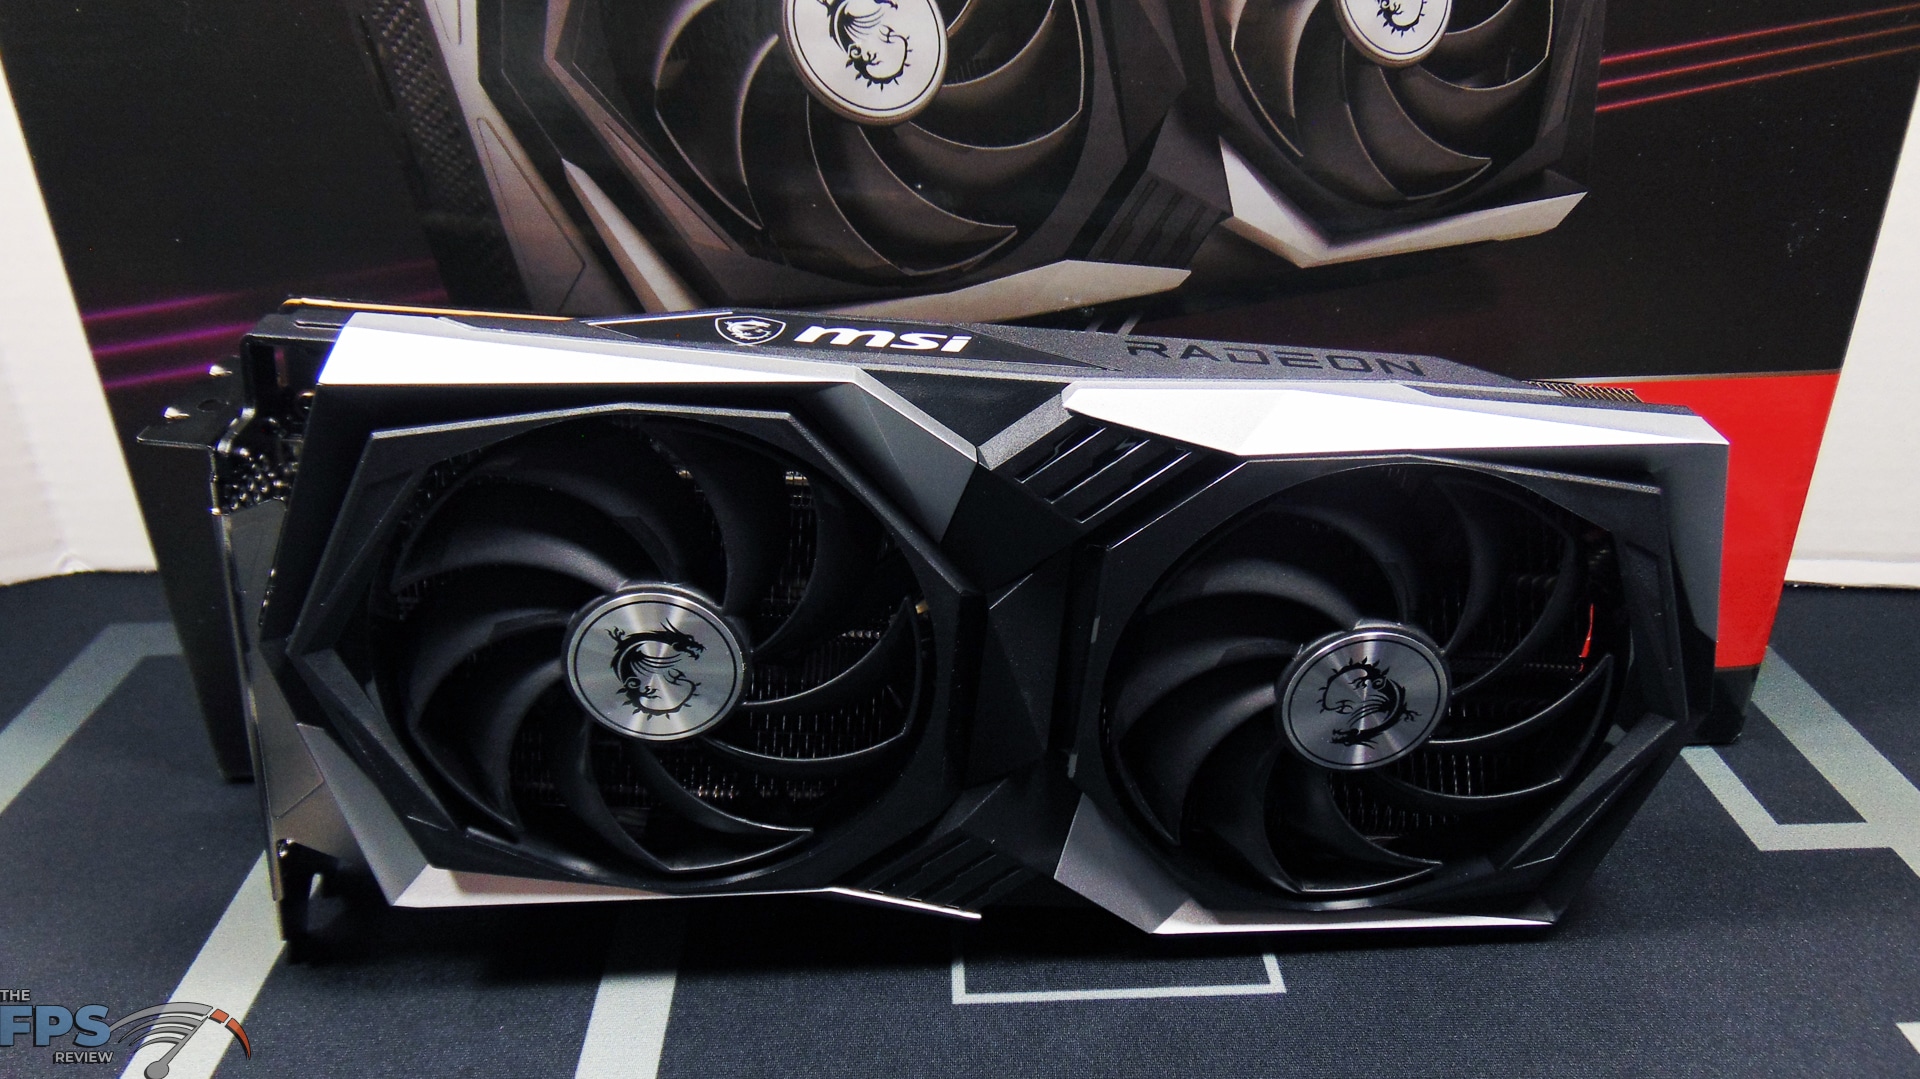 MSI Radeon RX 6600 XT GAMING X 8G Video Card Review - The FPS Review